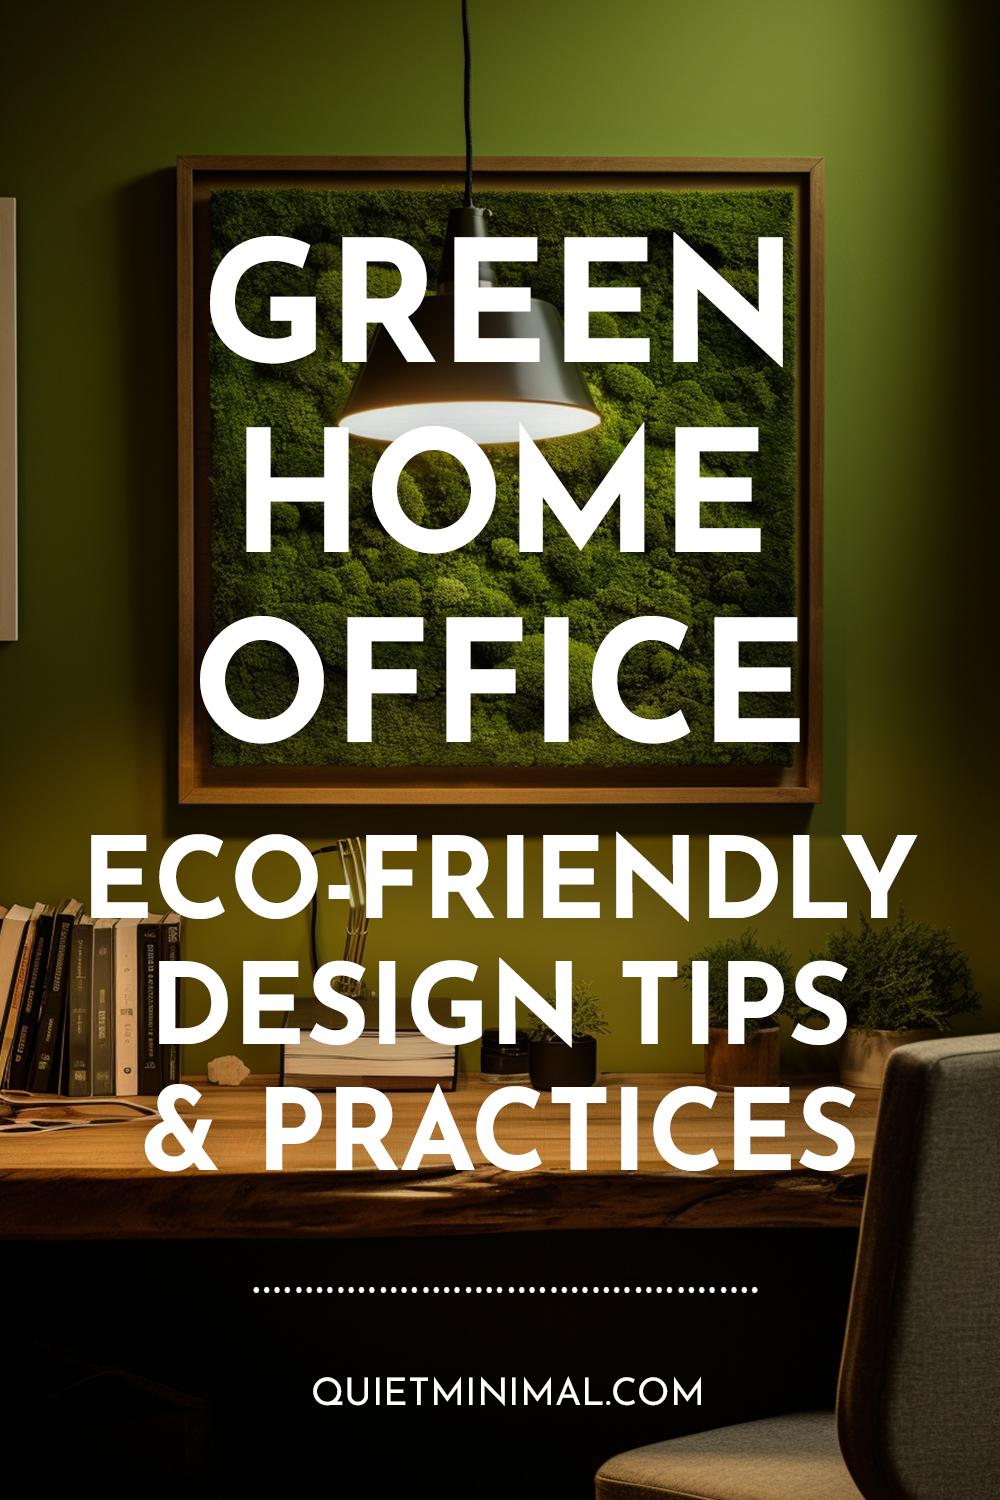 Green home office eco-friendly design tips and practices